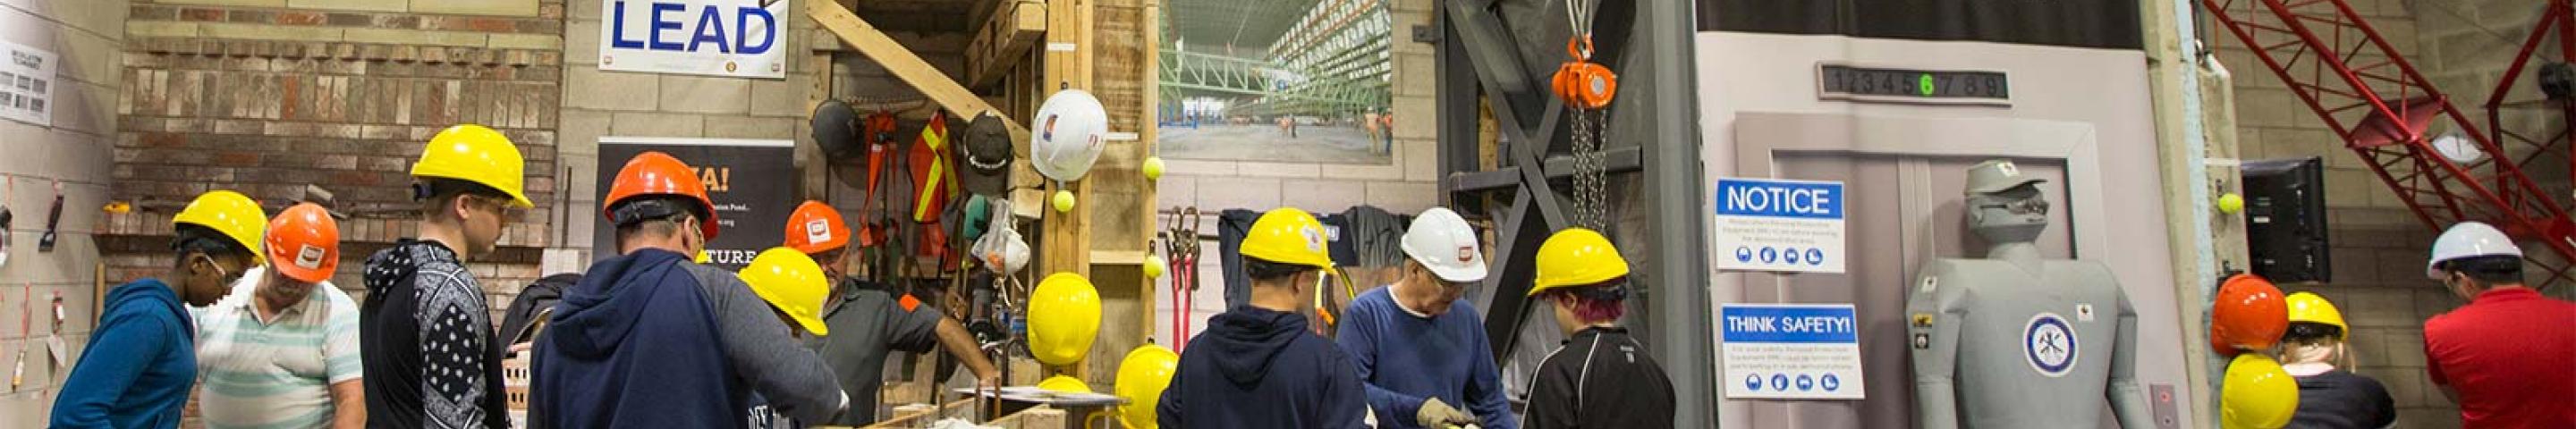 A mixture of youth and men working in a workshop while wearing yellow hard hats and gloves